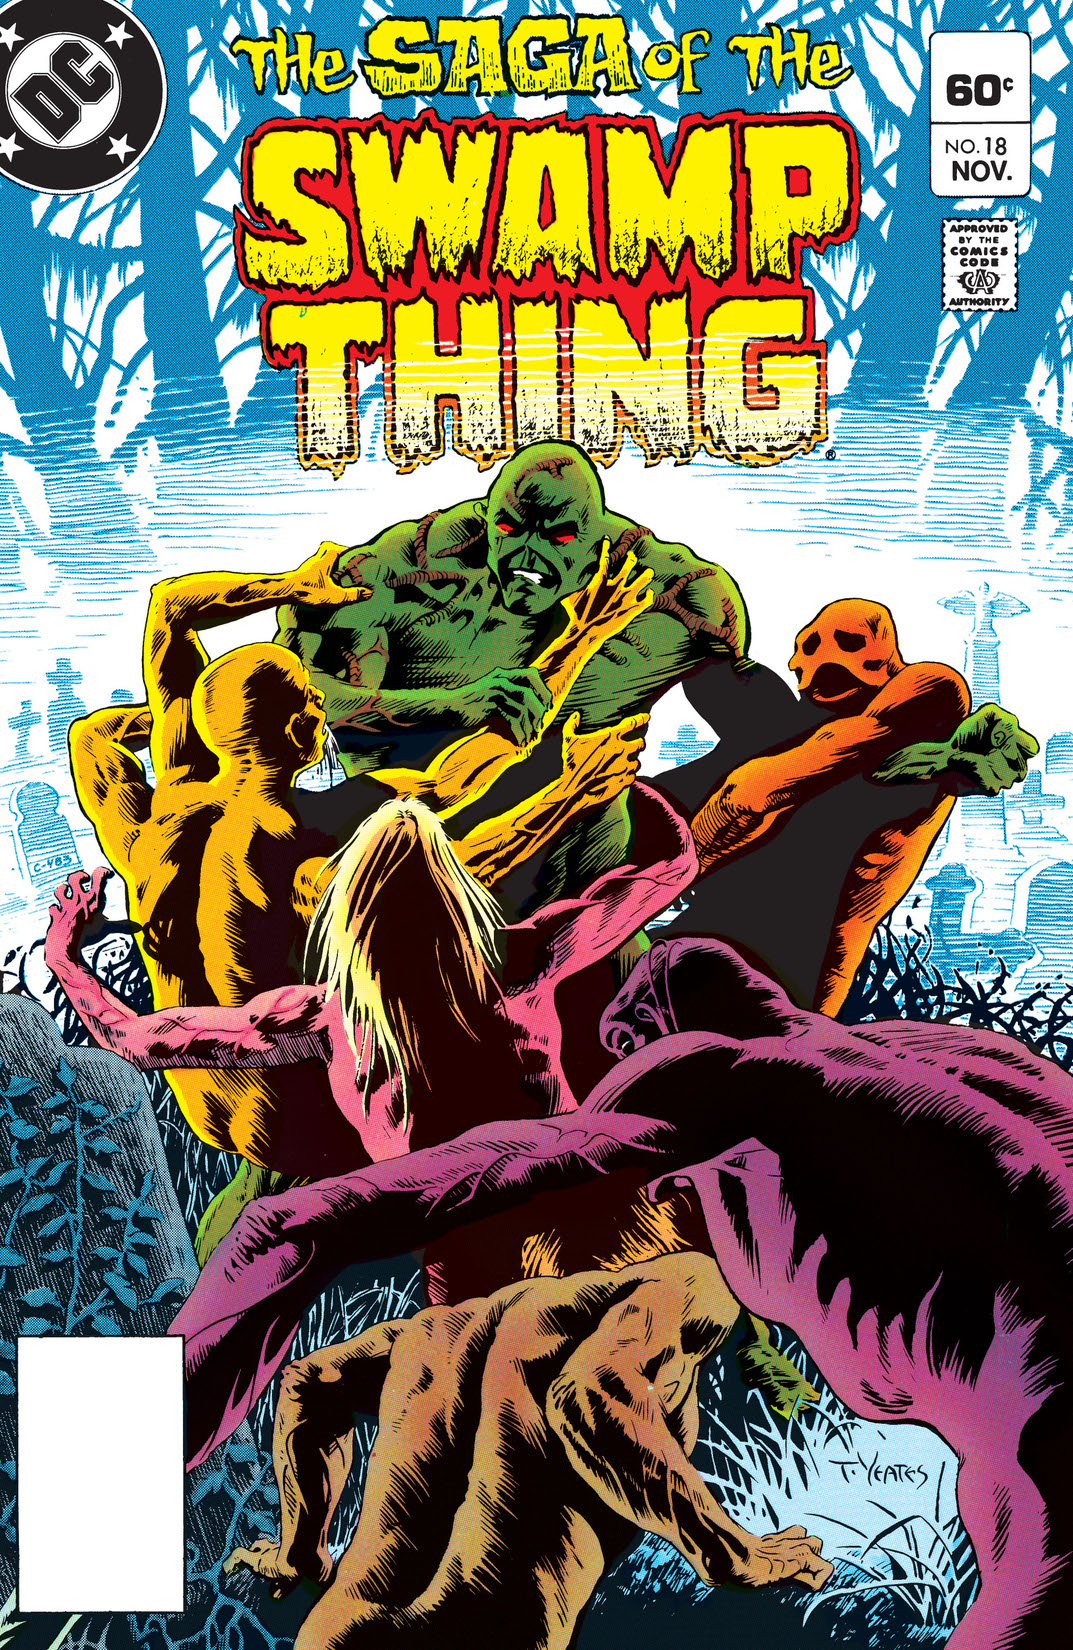 The Saga of the Swamp Thing (1982-) #18 preview images